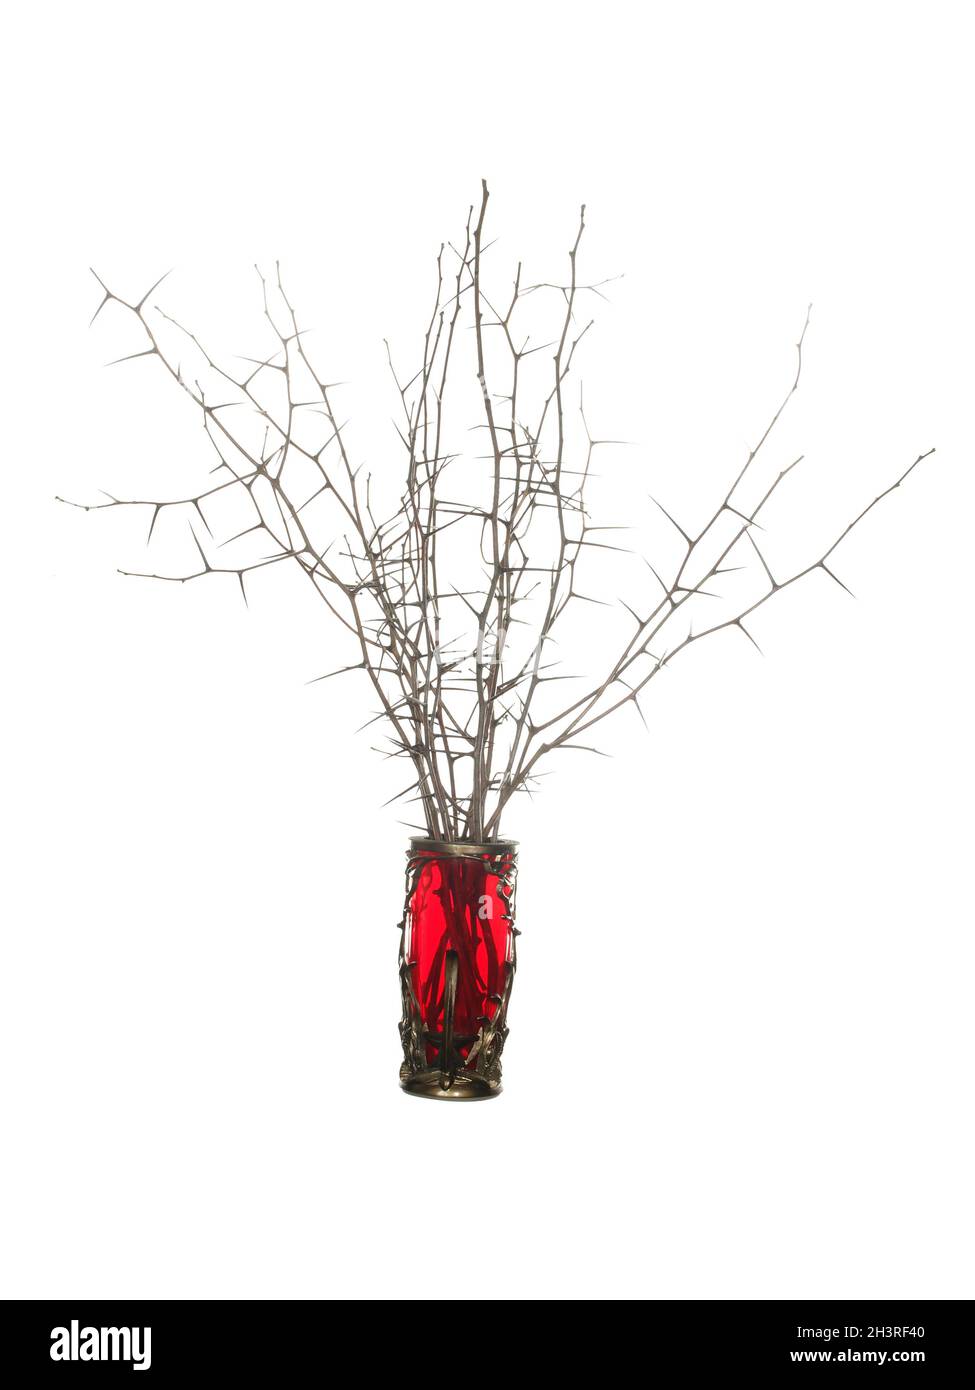 Dry twigs of blackthorn with long needles and without leaves in a red glass vase isolated on a white background Stock Photo